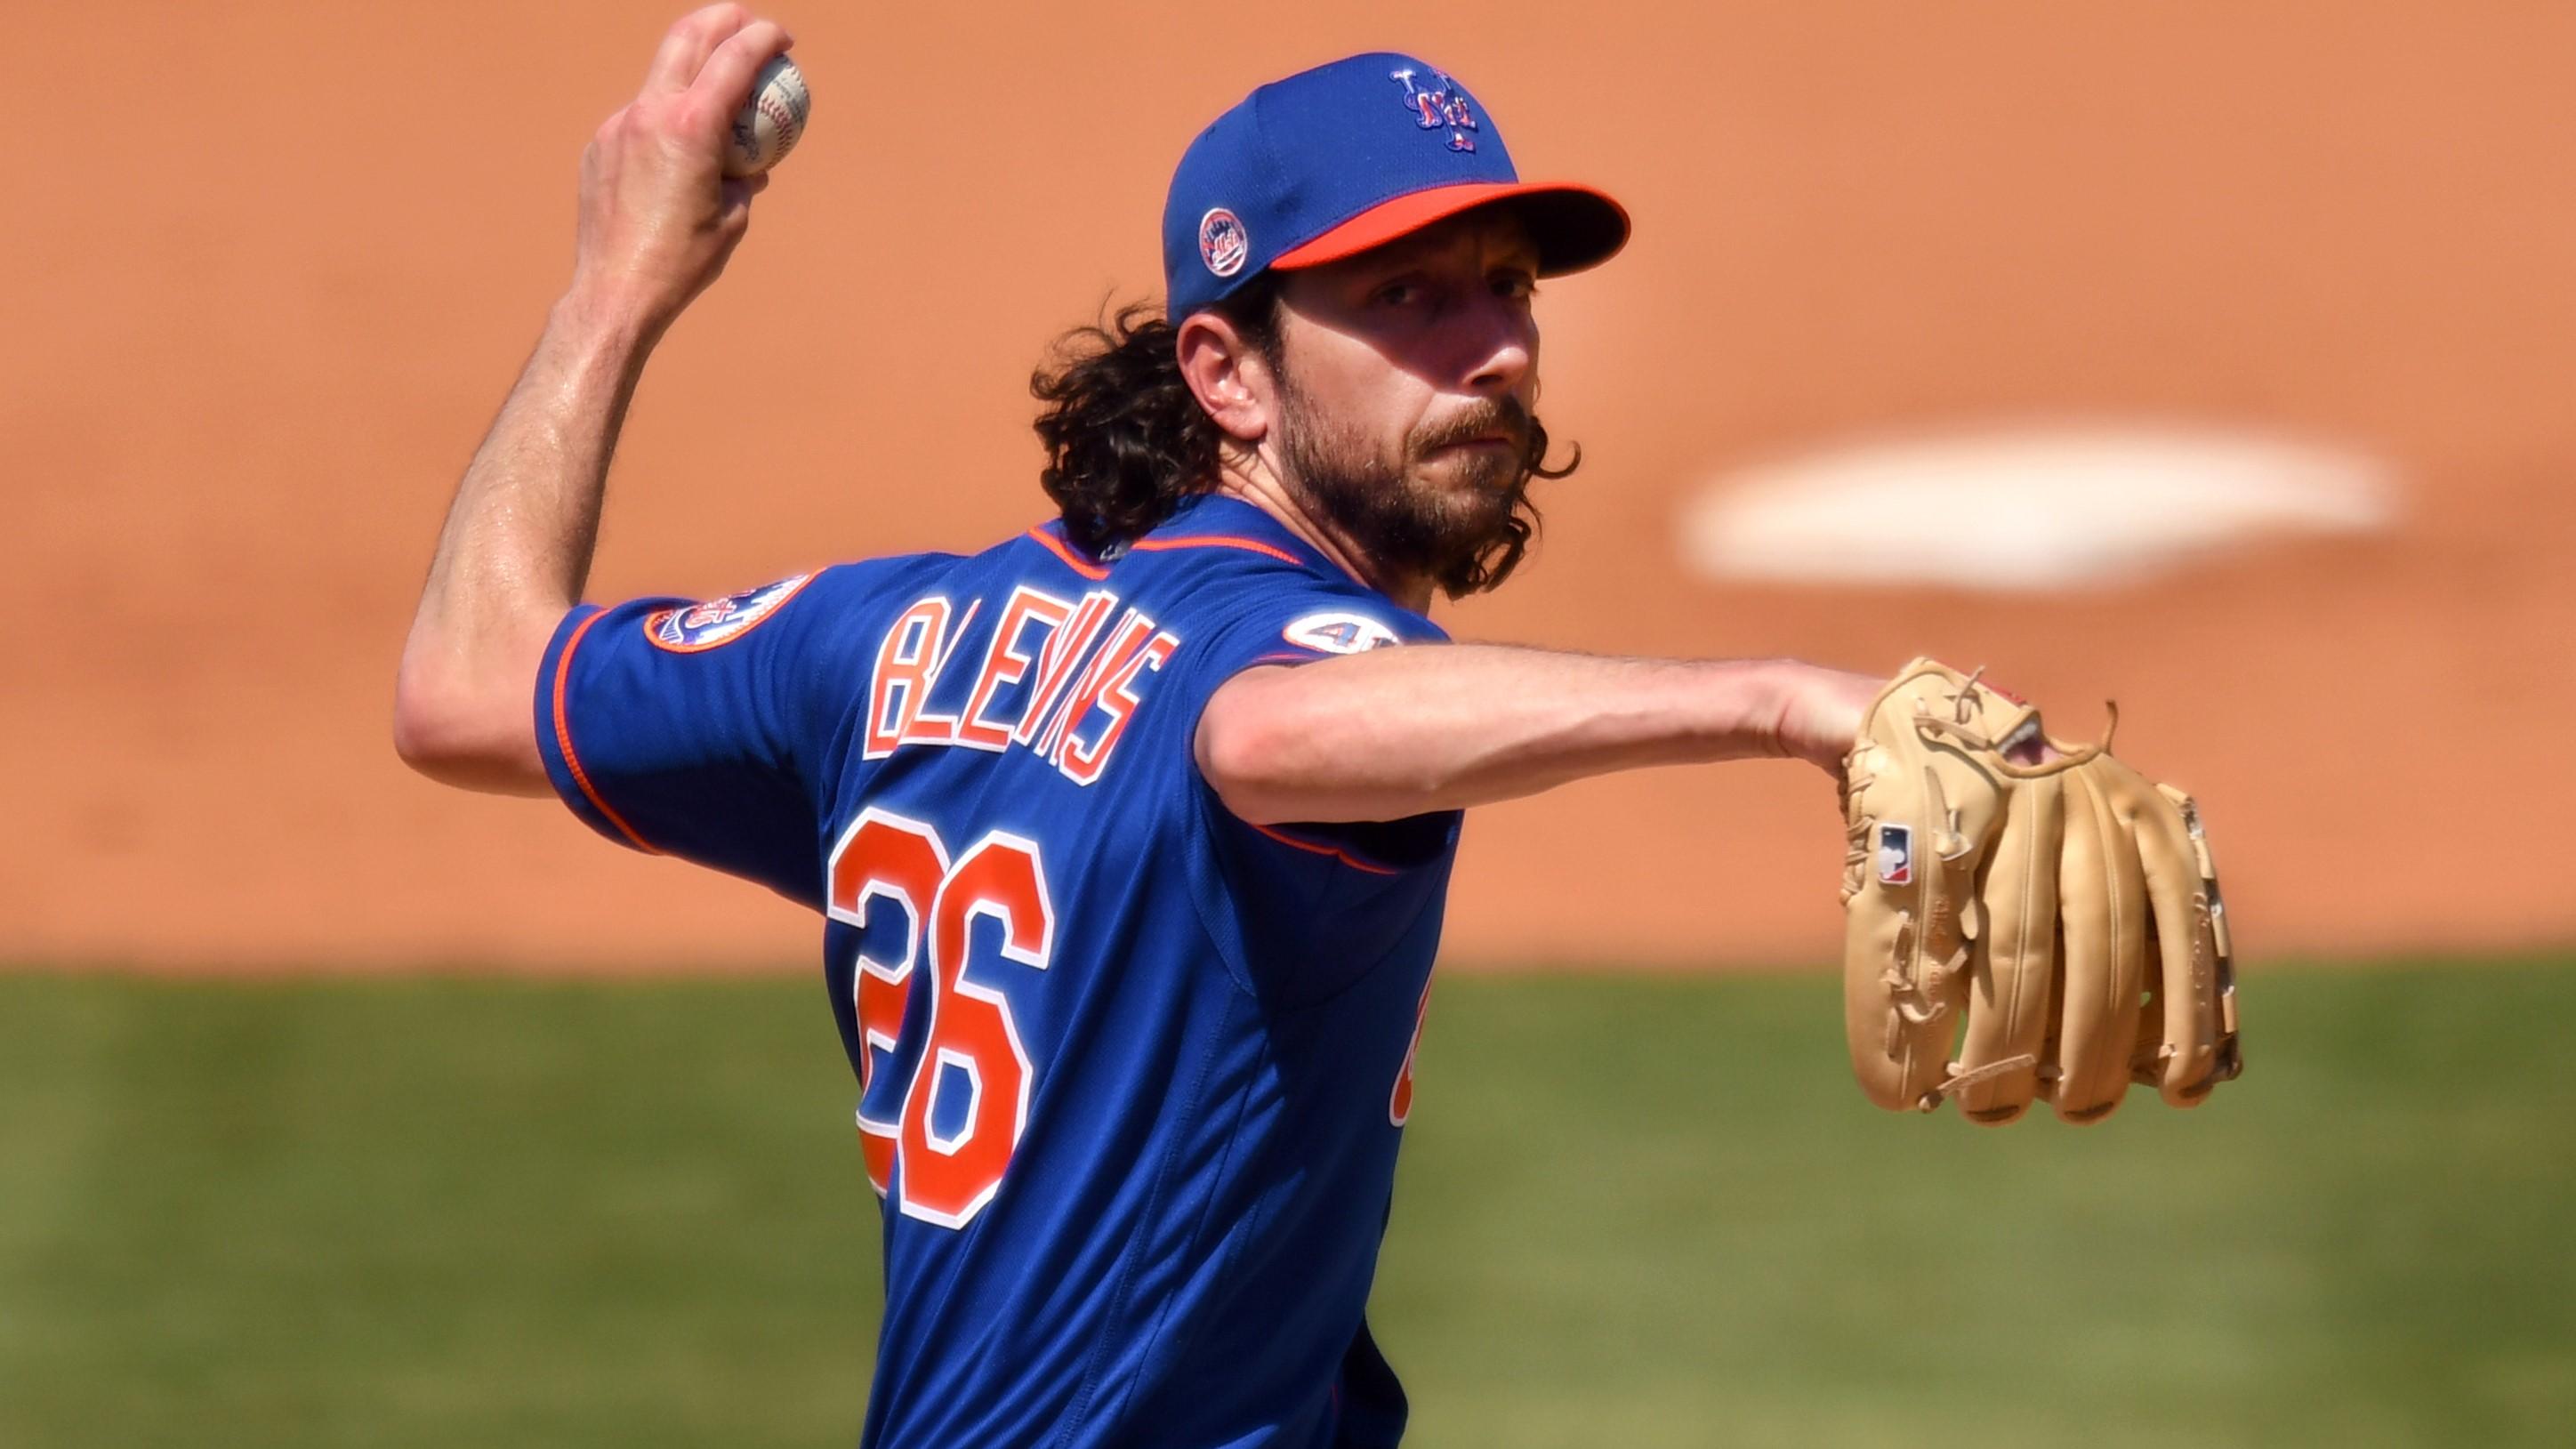 Mar 19, 2021; Port St. Lucie, Florida, USA; New York Mets pitcher Jerry Blevins pitches against the St. Louis Cardinals during a spring training game at Clover Park / Jim Rassol-USA TODAY Sports